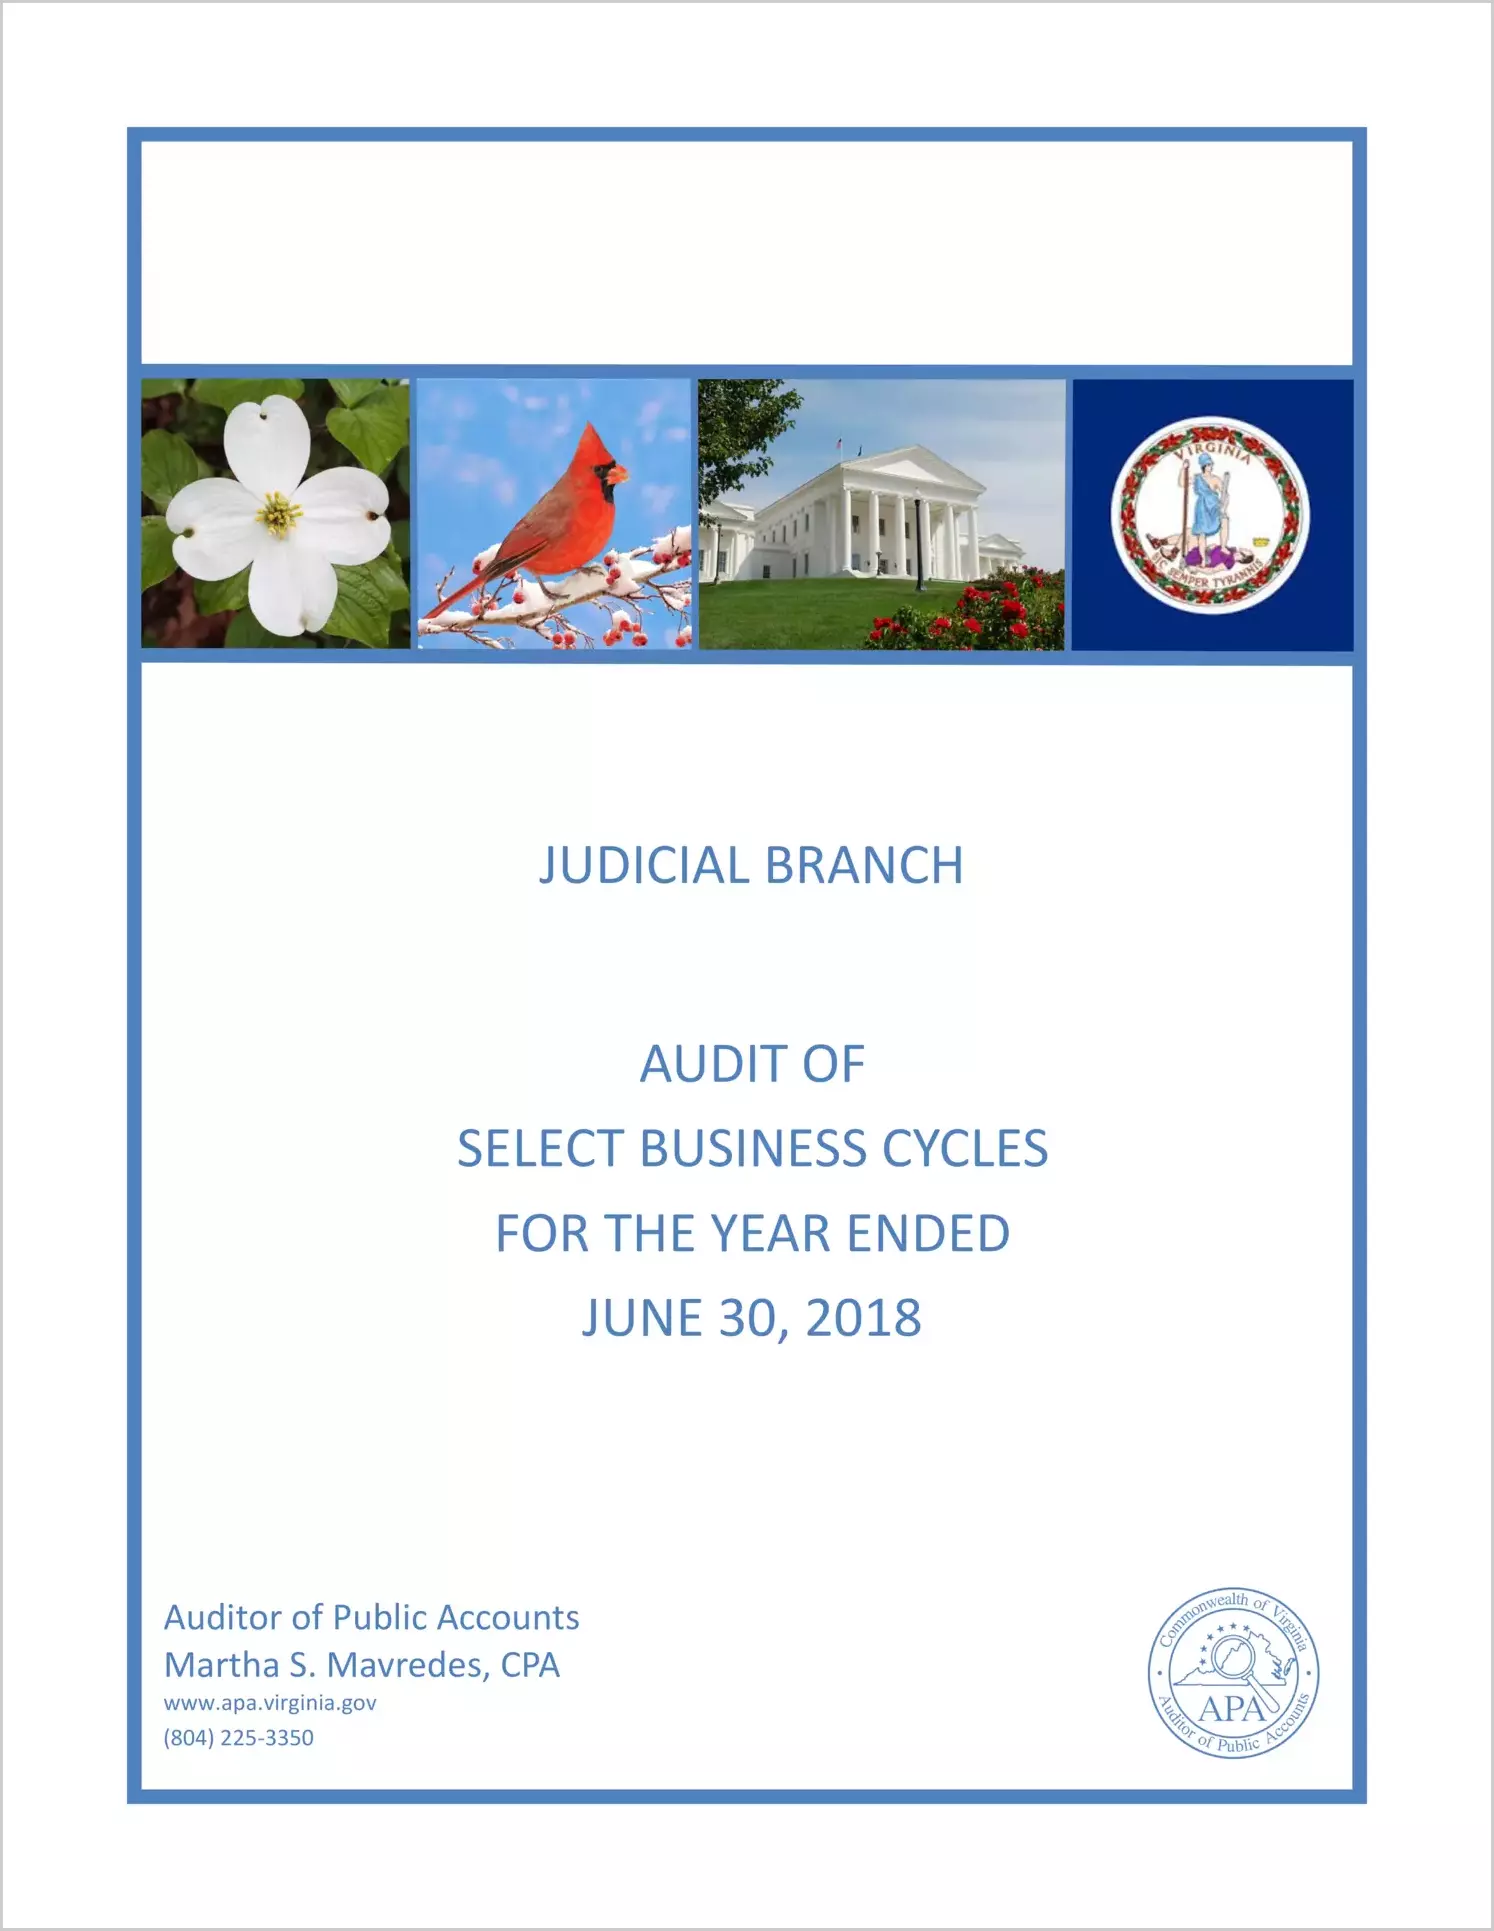 Judicial Branch Audit of Select Business Cycles for the year ended June 30, 2018